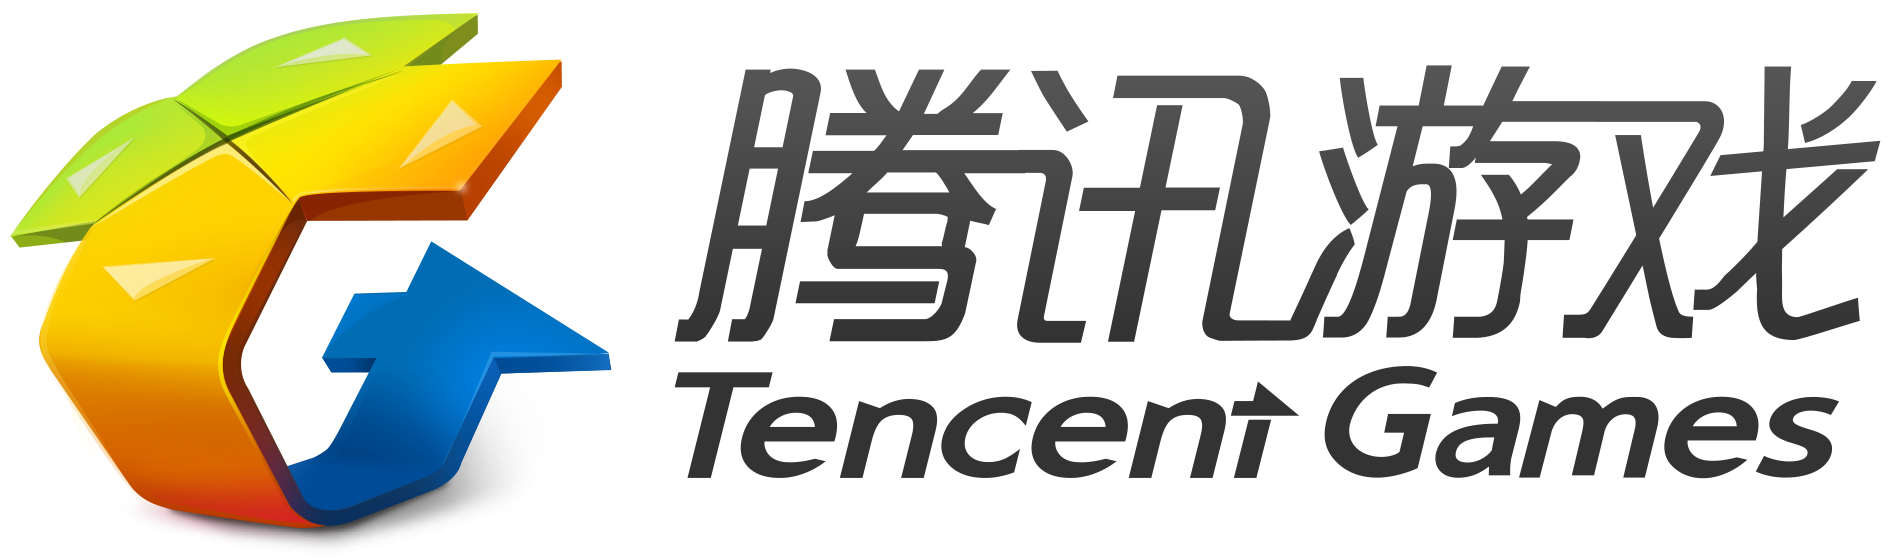 does tencent own gameloop